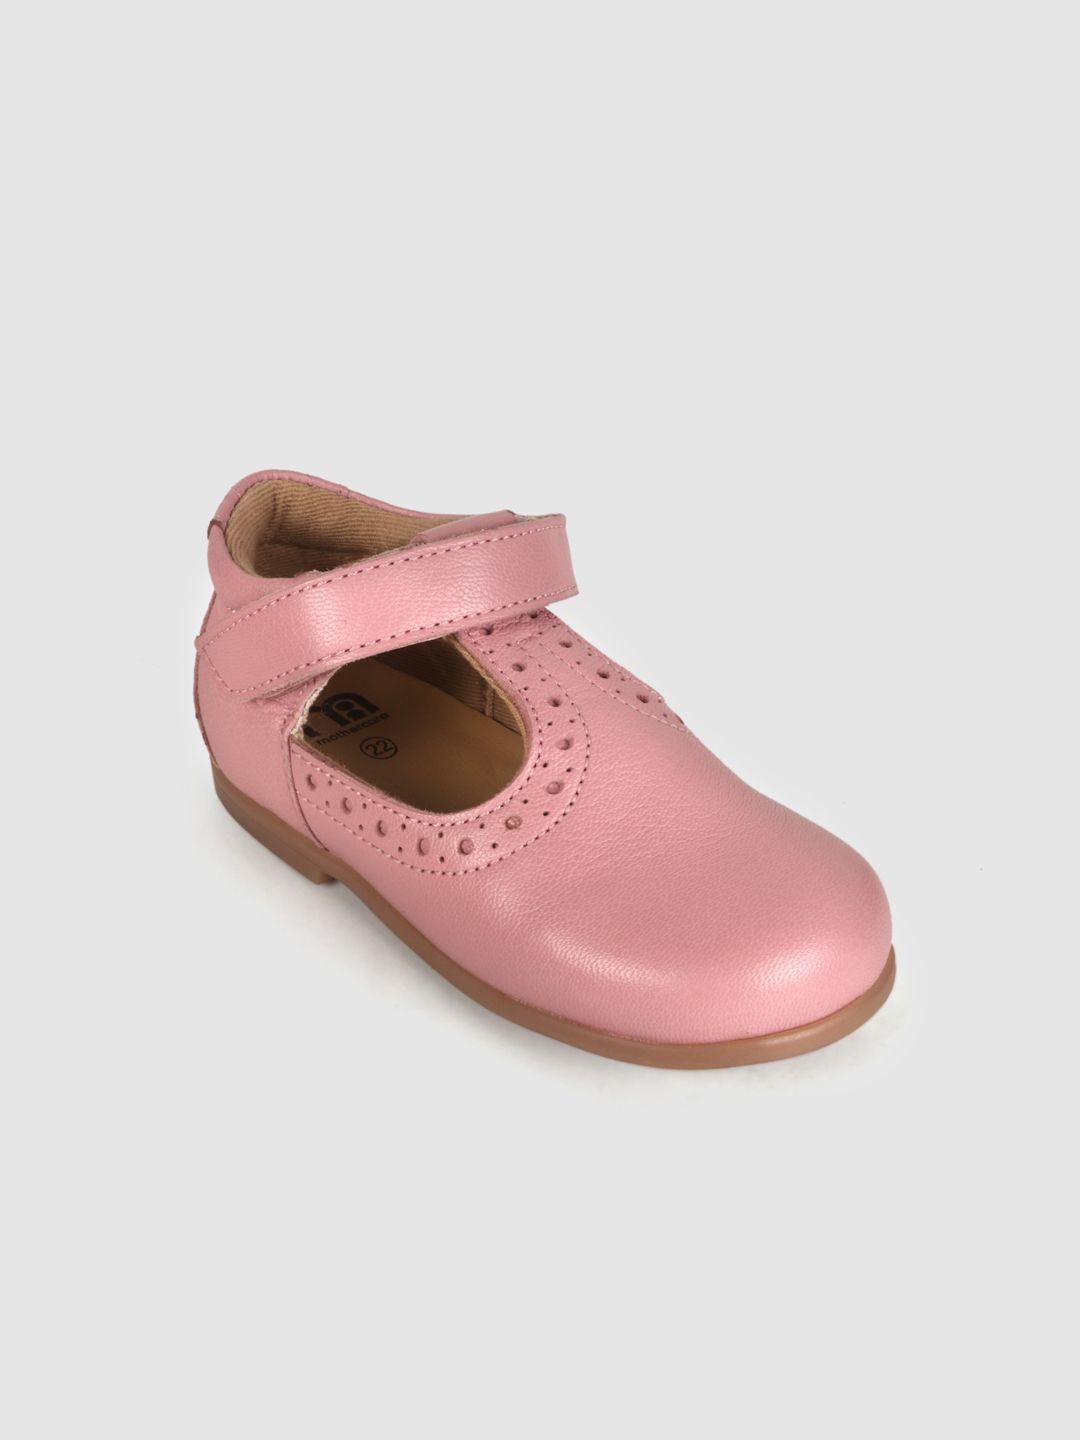 mothercare infant girls pink cut out design first walker booties